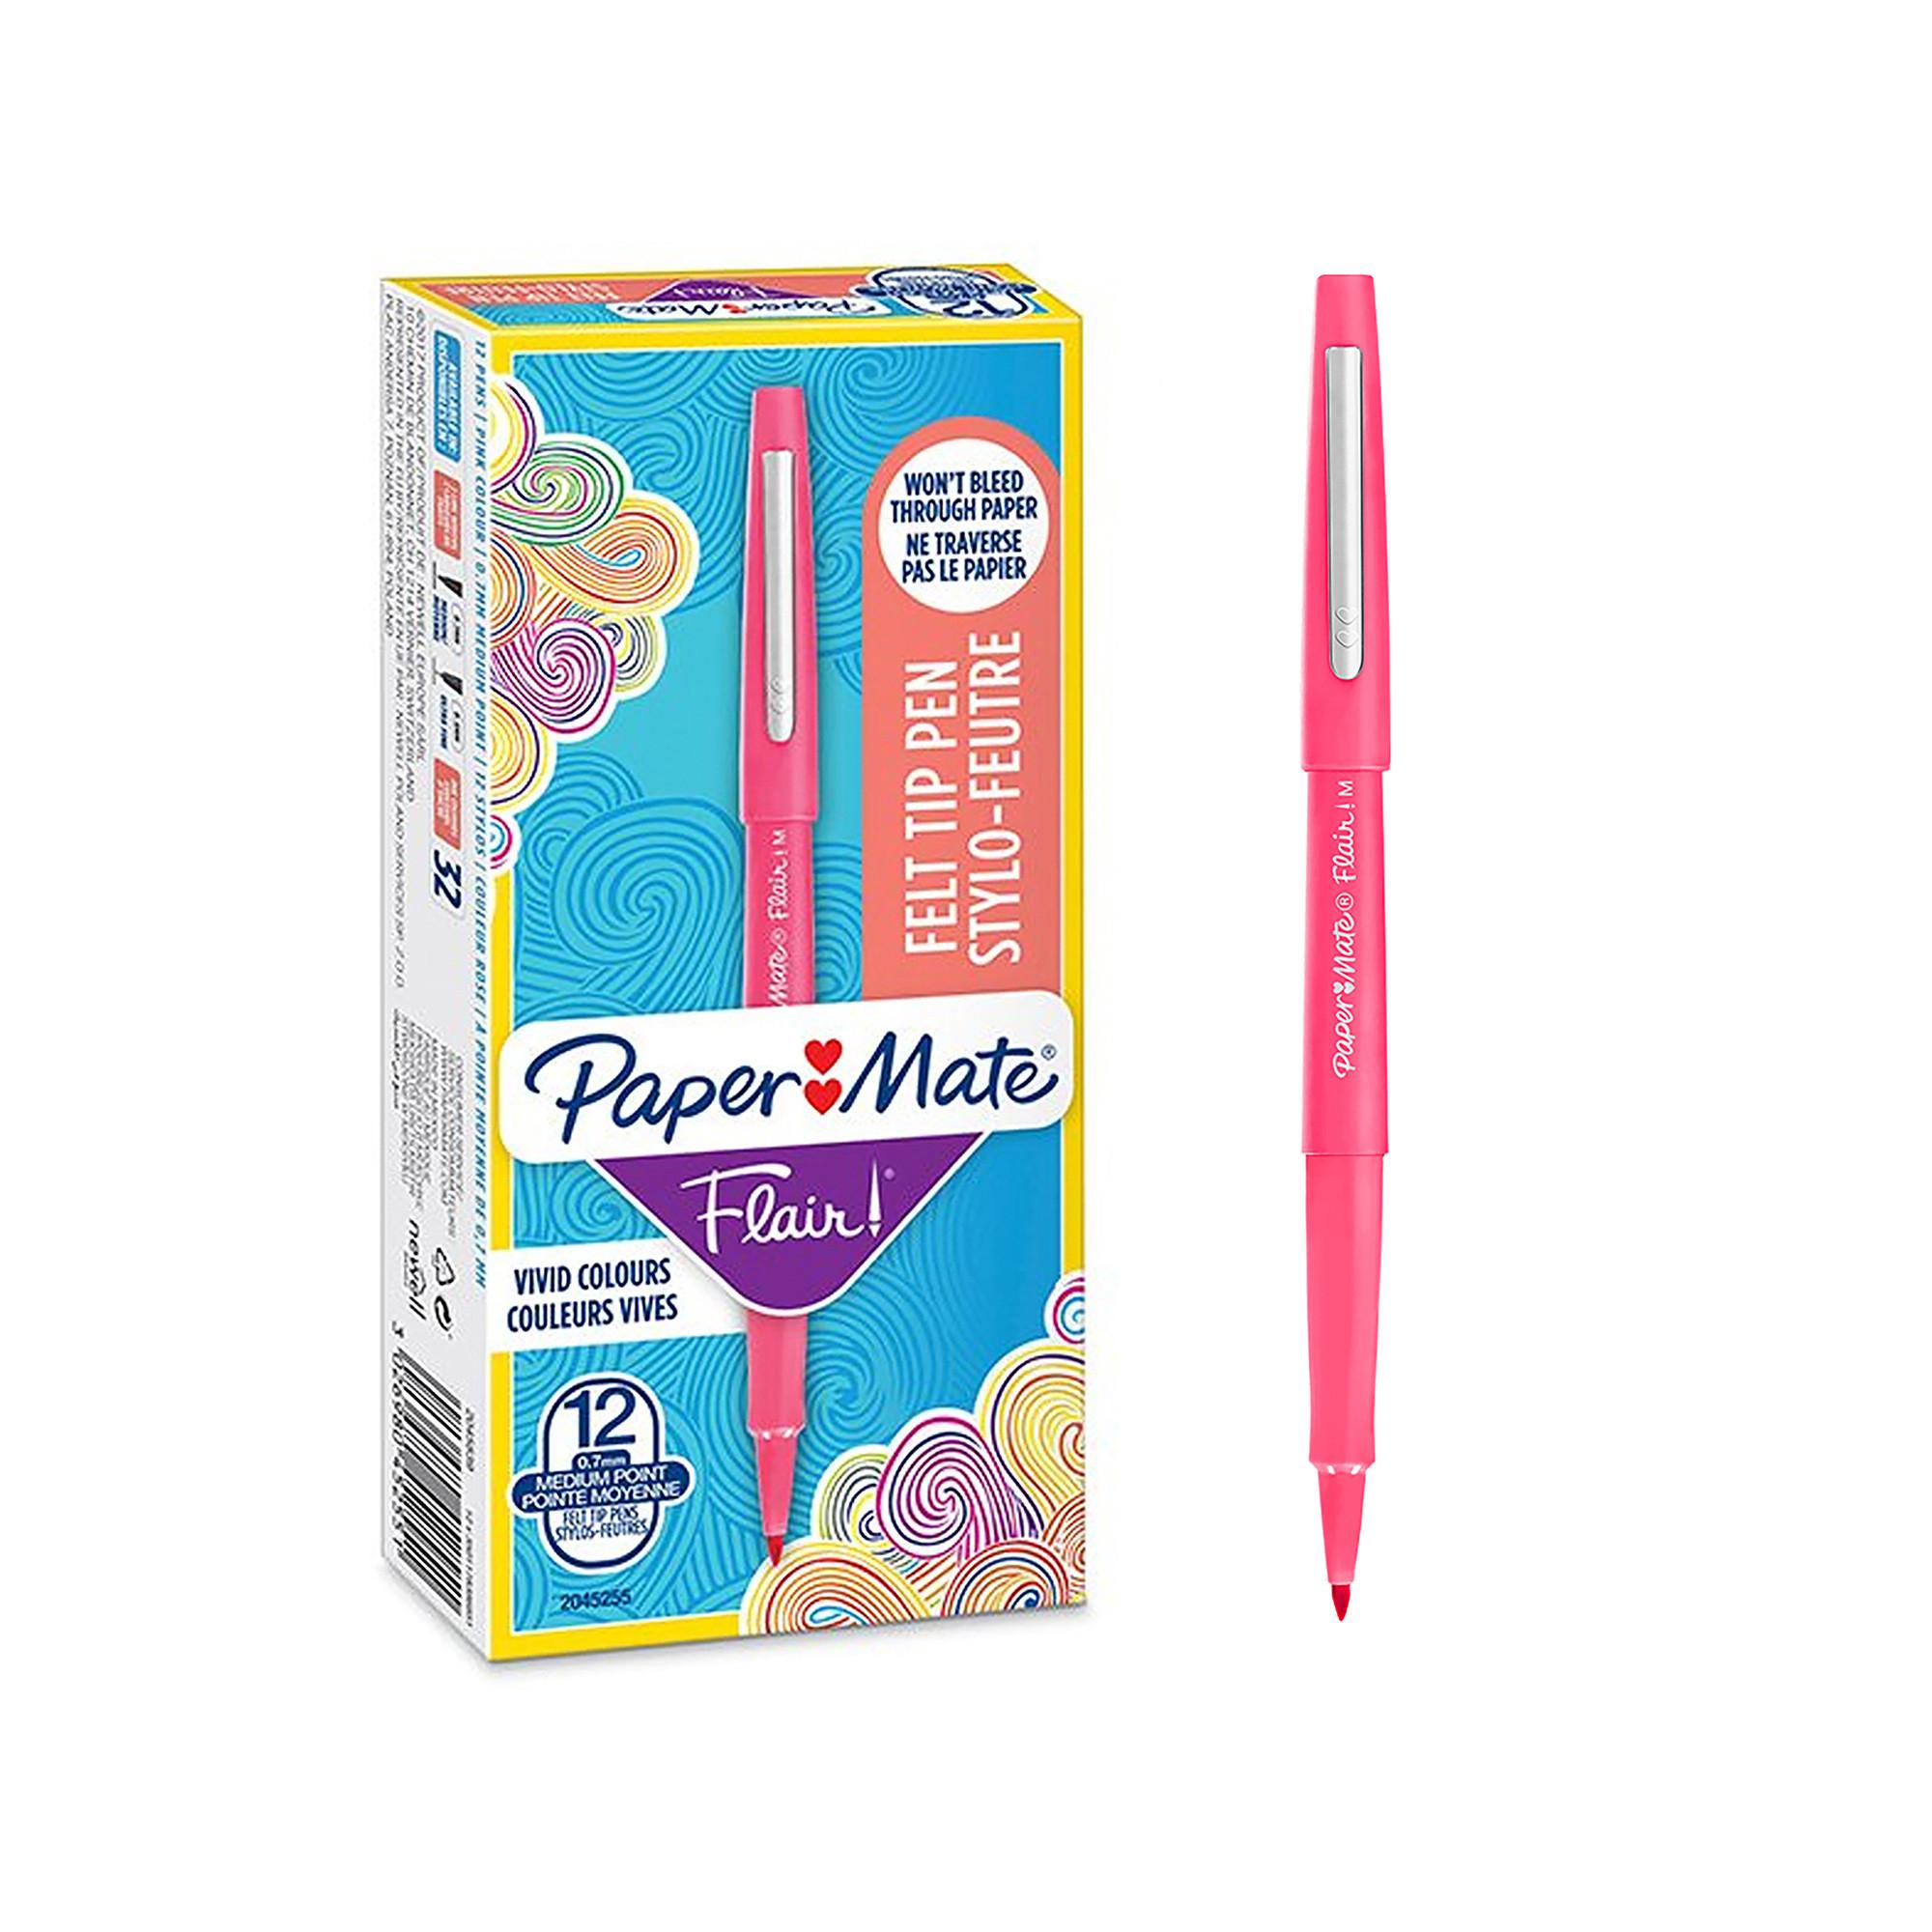 Papermate Stylo-feutre
 Paper Mate Flair 